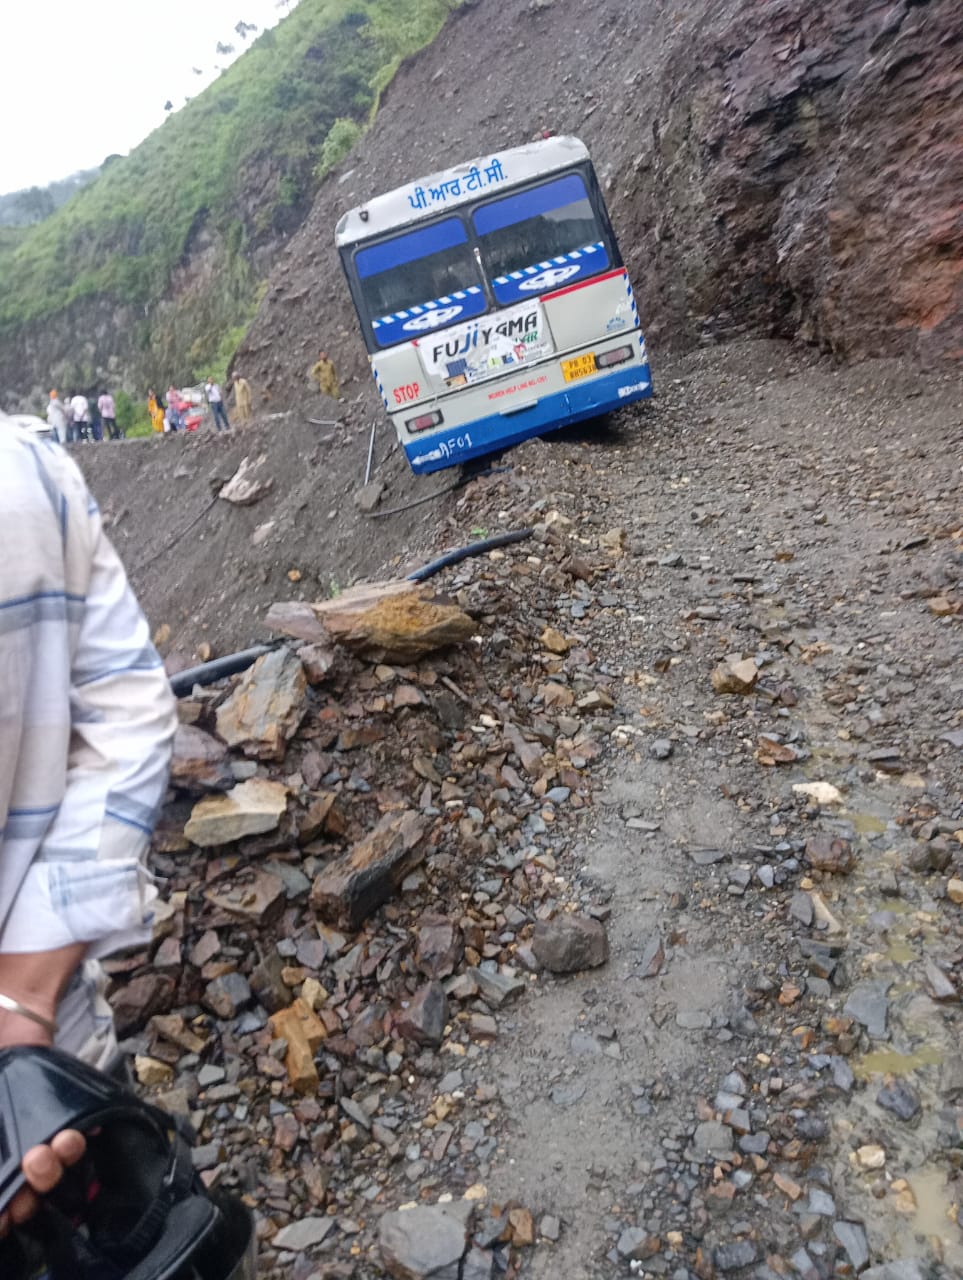 Punjab Roadways bus is hanging in the air in Sirmaur, the passengers are holding their breath